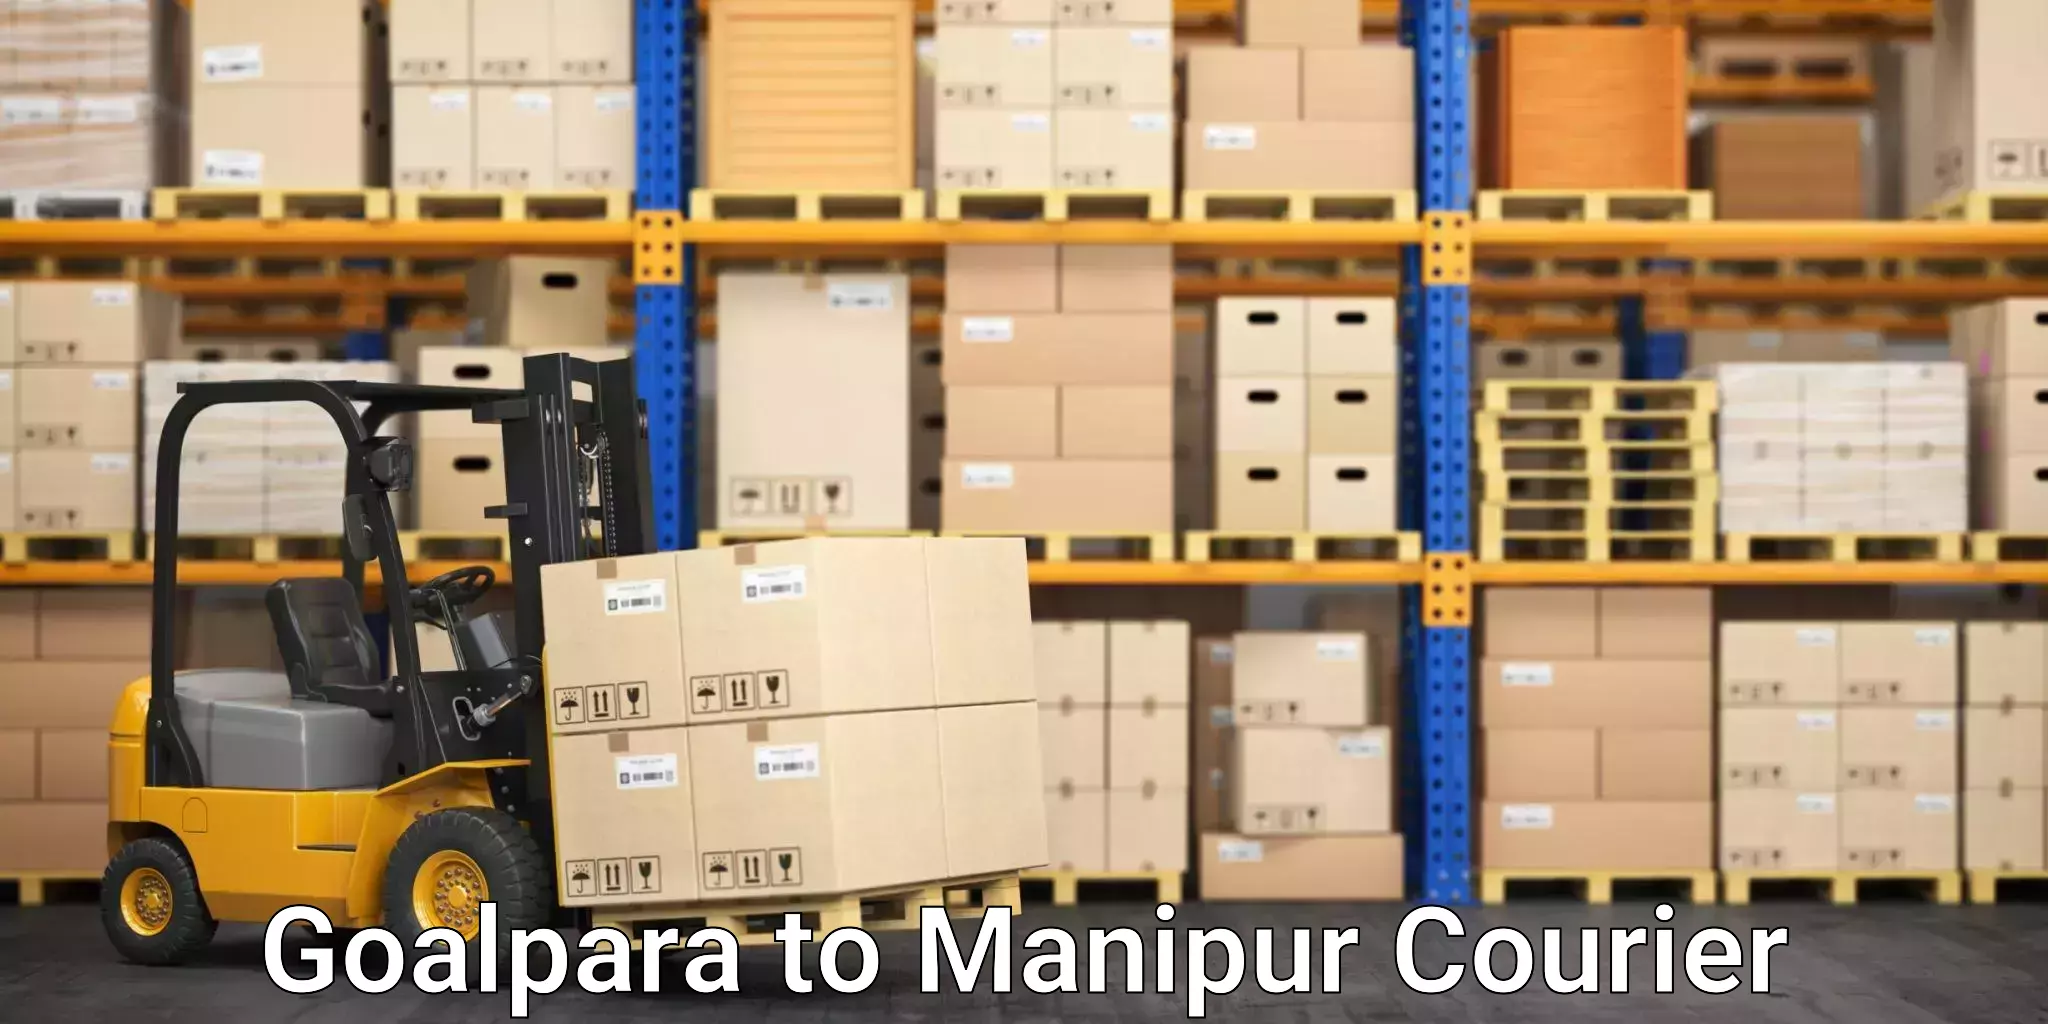 Cargo delivery service Goalpara to Manipur